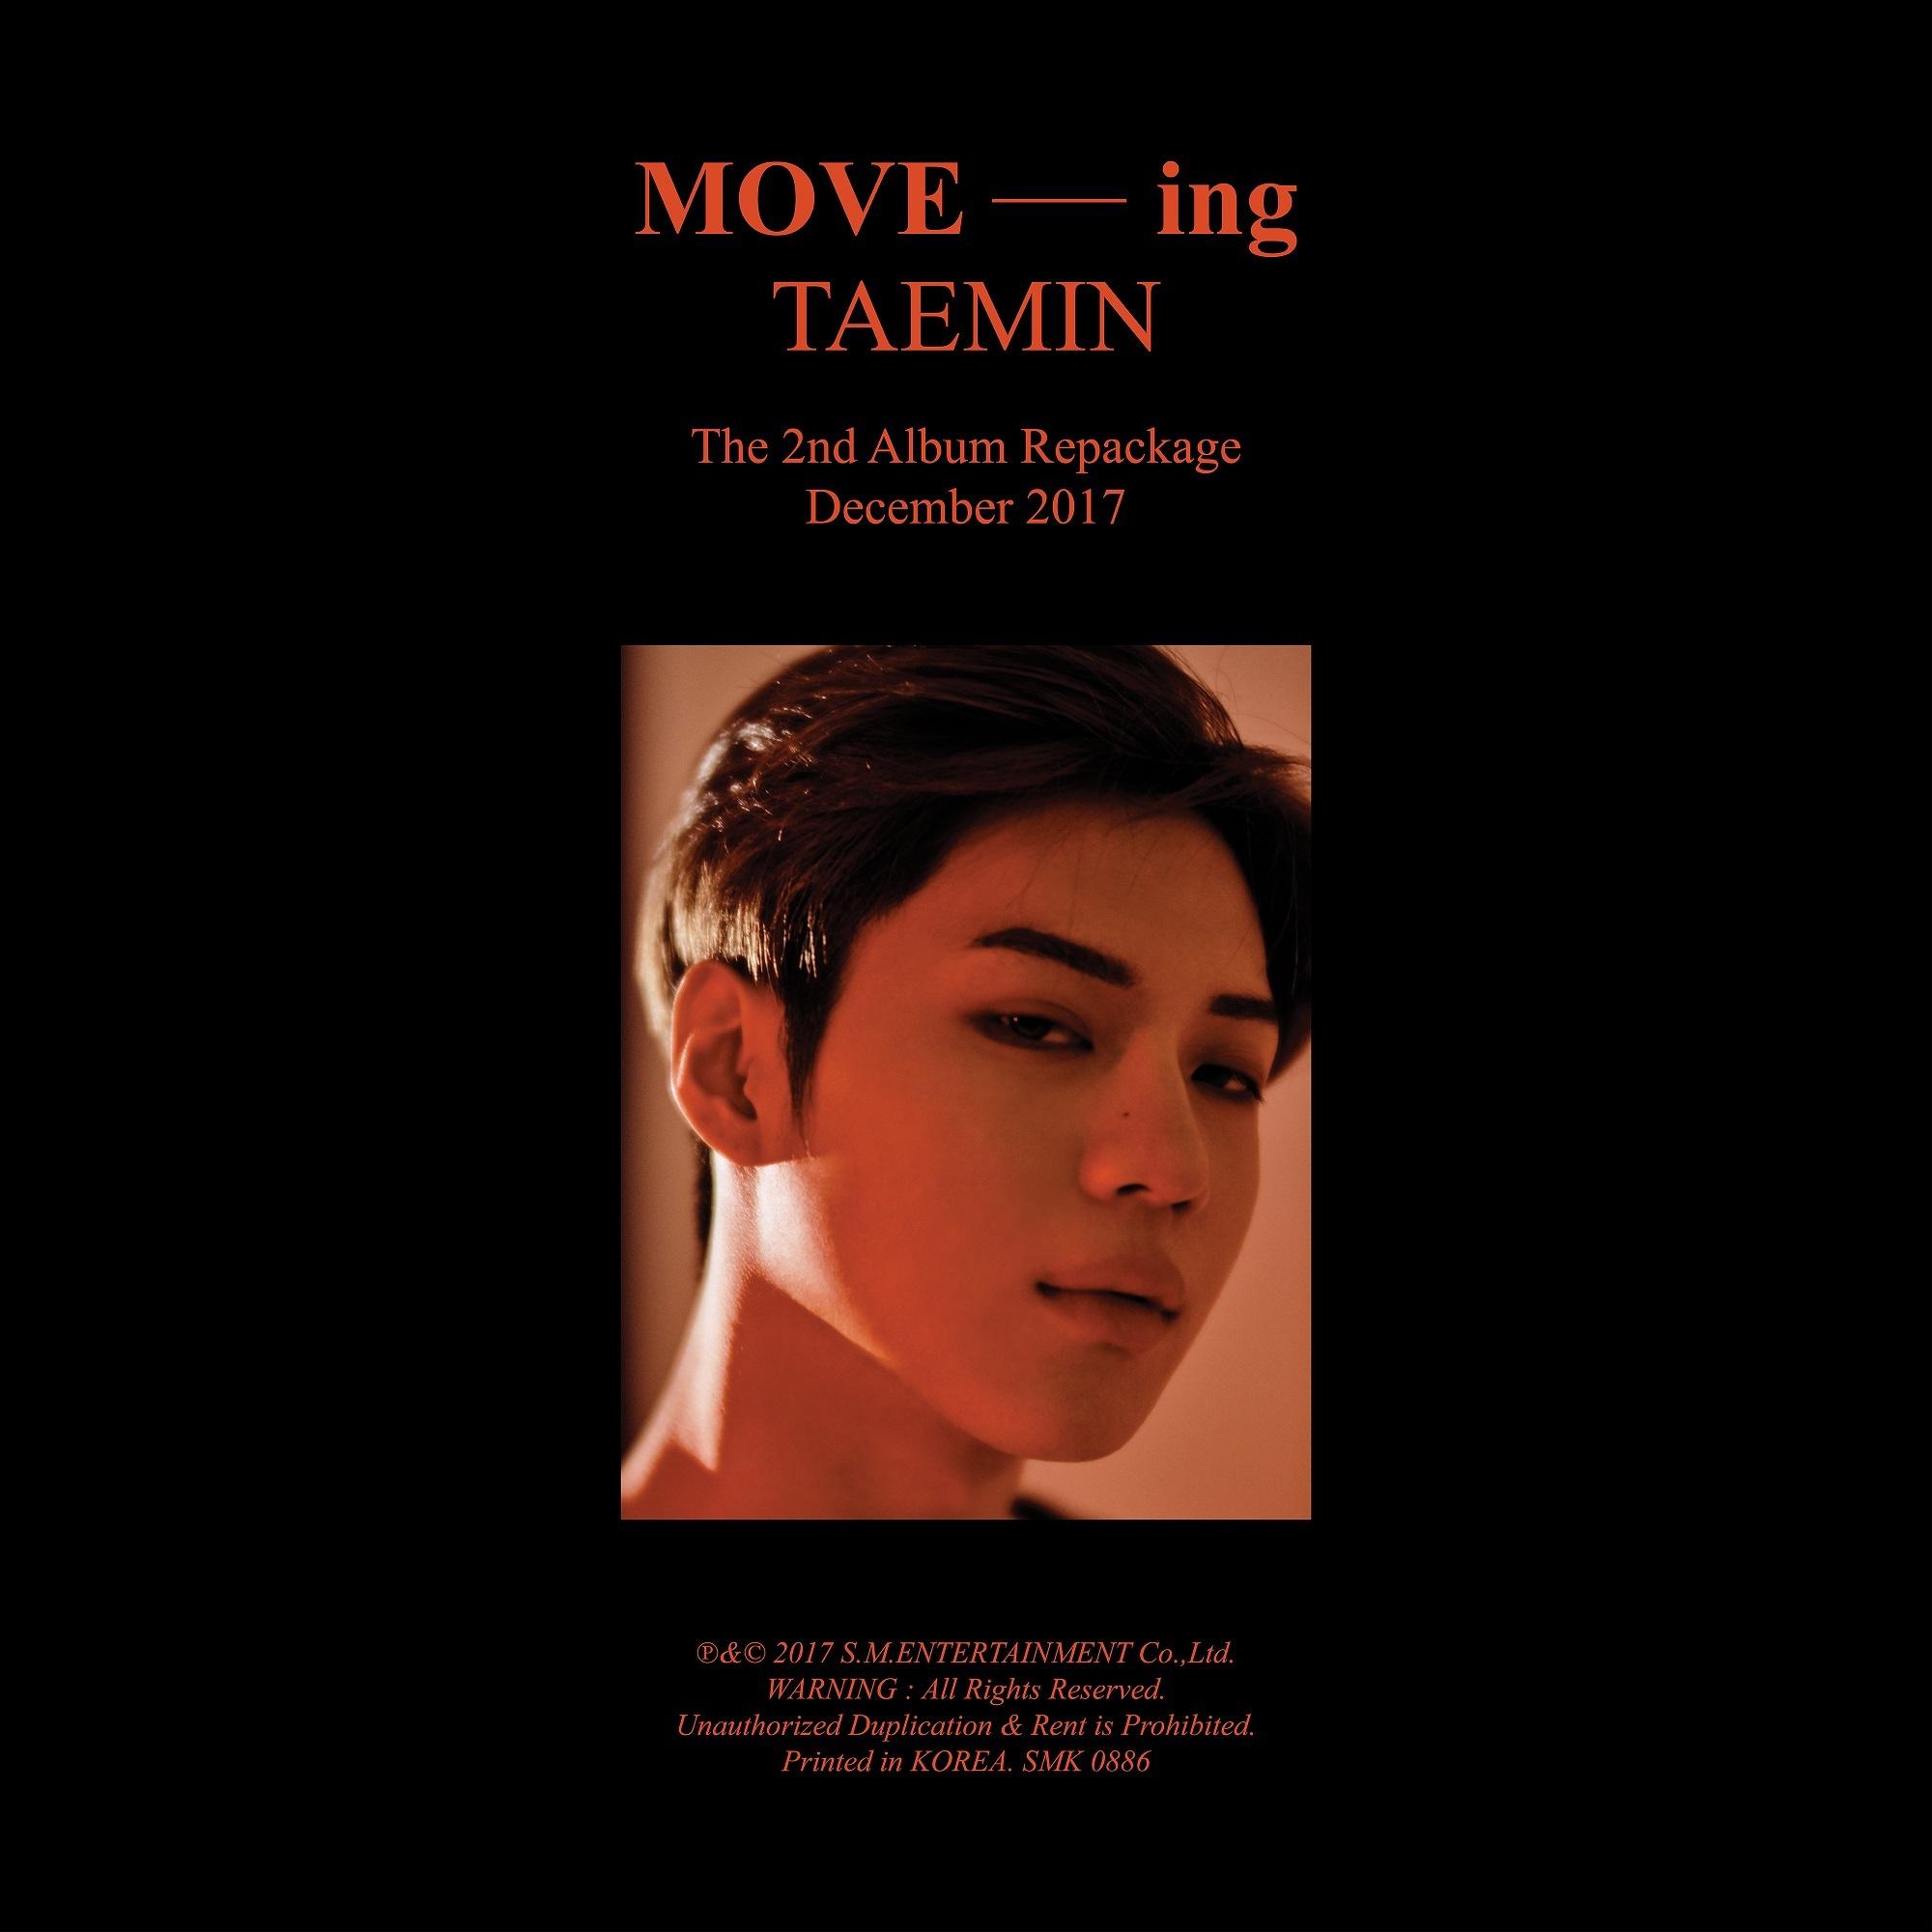 MOVEing  The 2nd Album Repackage